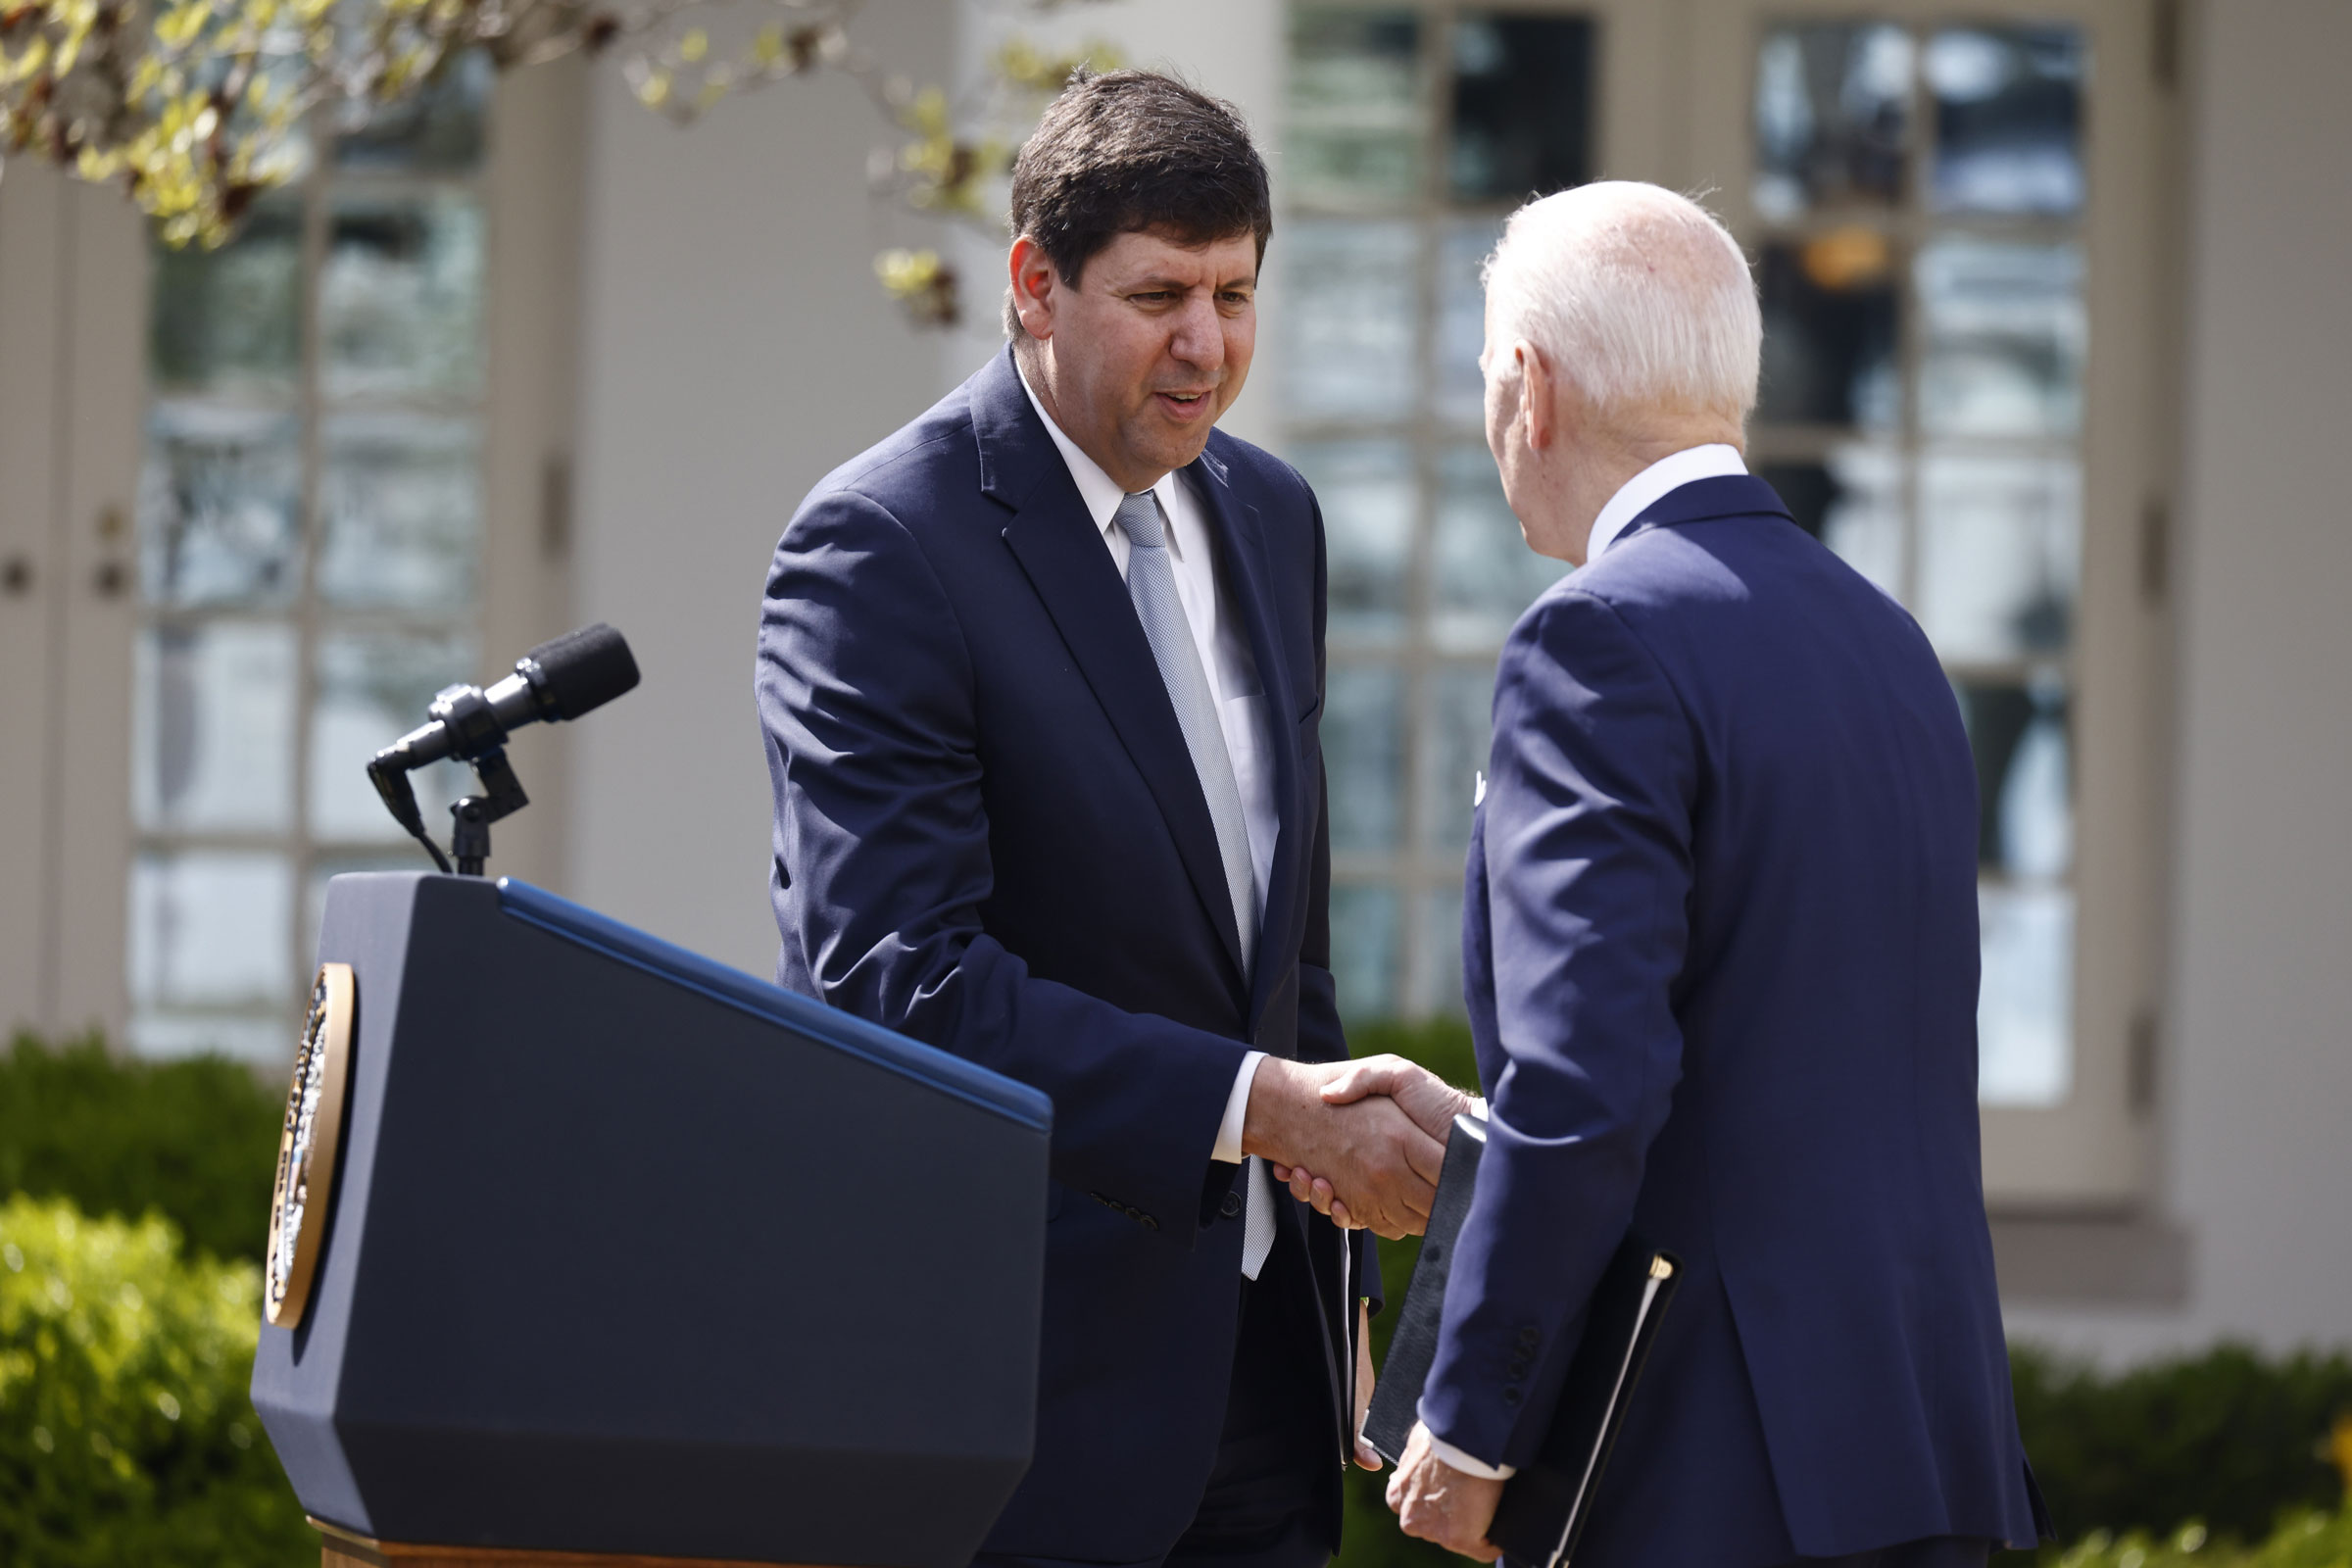 Steve Dettelbach, nominee for director of the Bureau of Alcohol, Tobacco, Firearms and Explosives (ATF), left, shakes hands with U.S. President Joe Biden before speaking in the Rose Garden of the White House in Washington, D.C., U.S., on Monday, April 11, 2022. (Ting Shen—Bloomberg/Getty Images)